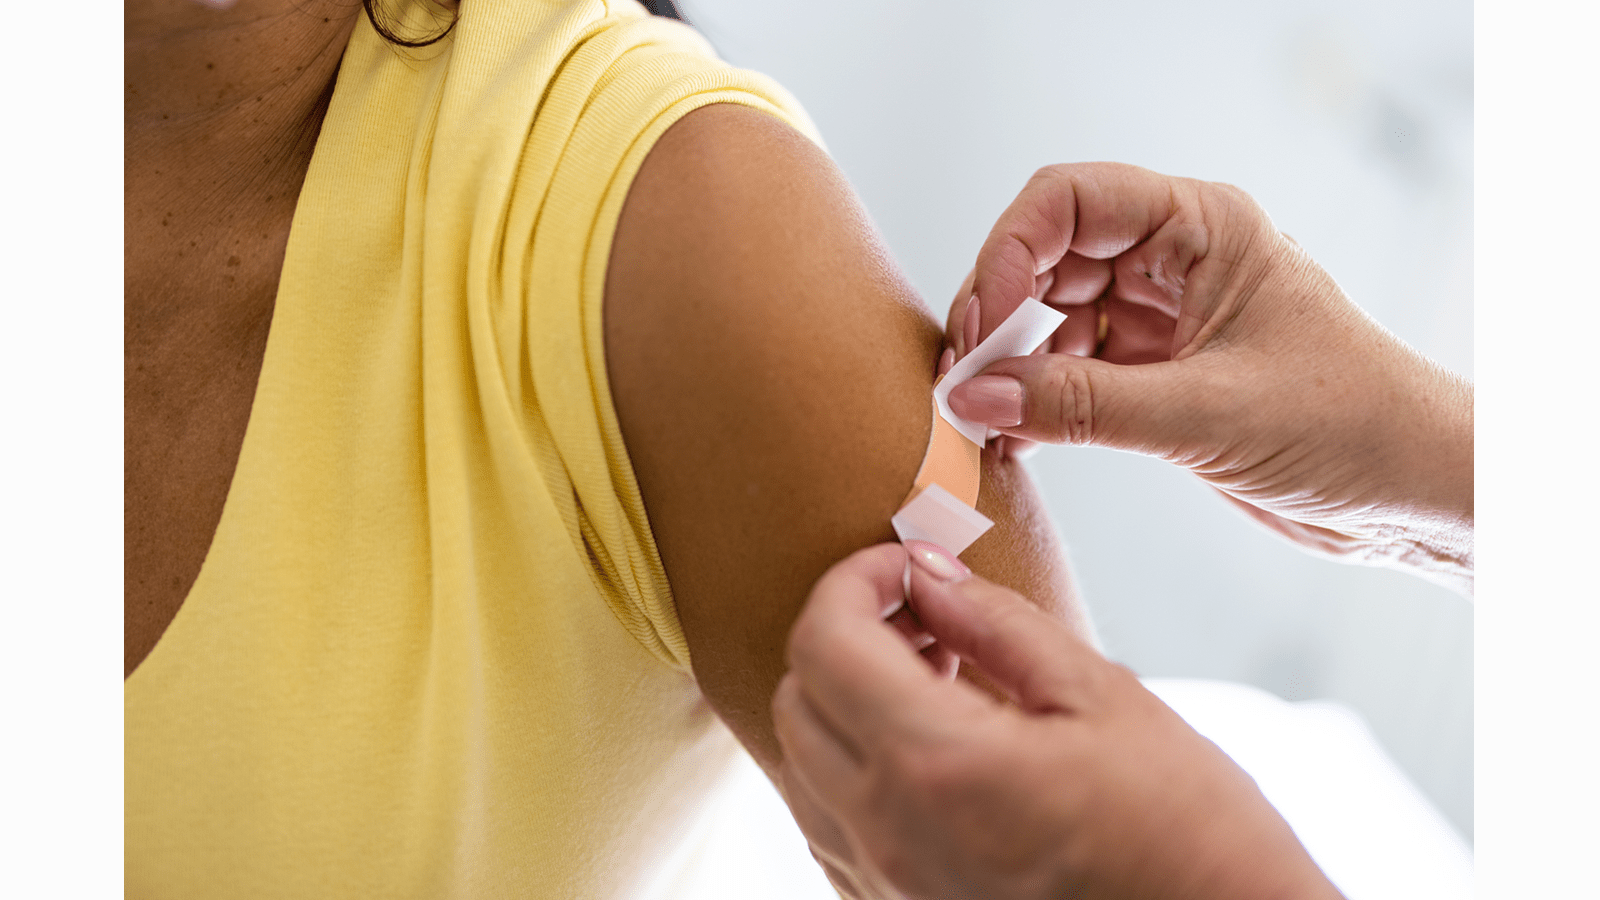 Woman receives a bandage on her upper arm after a vaccine.